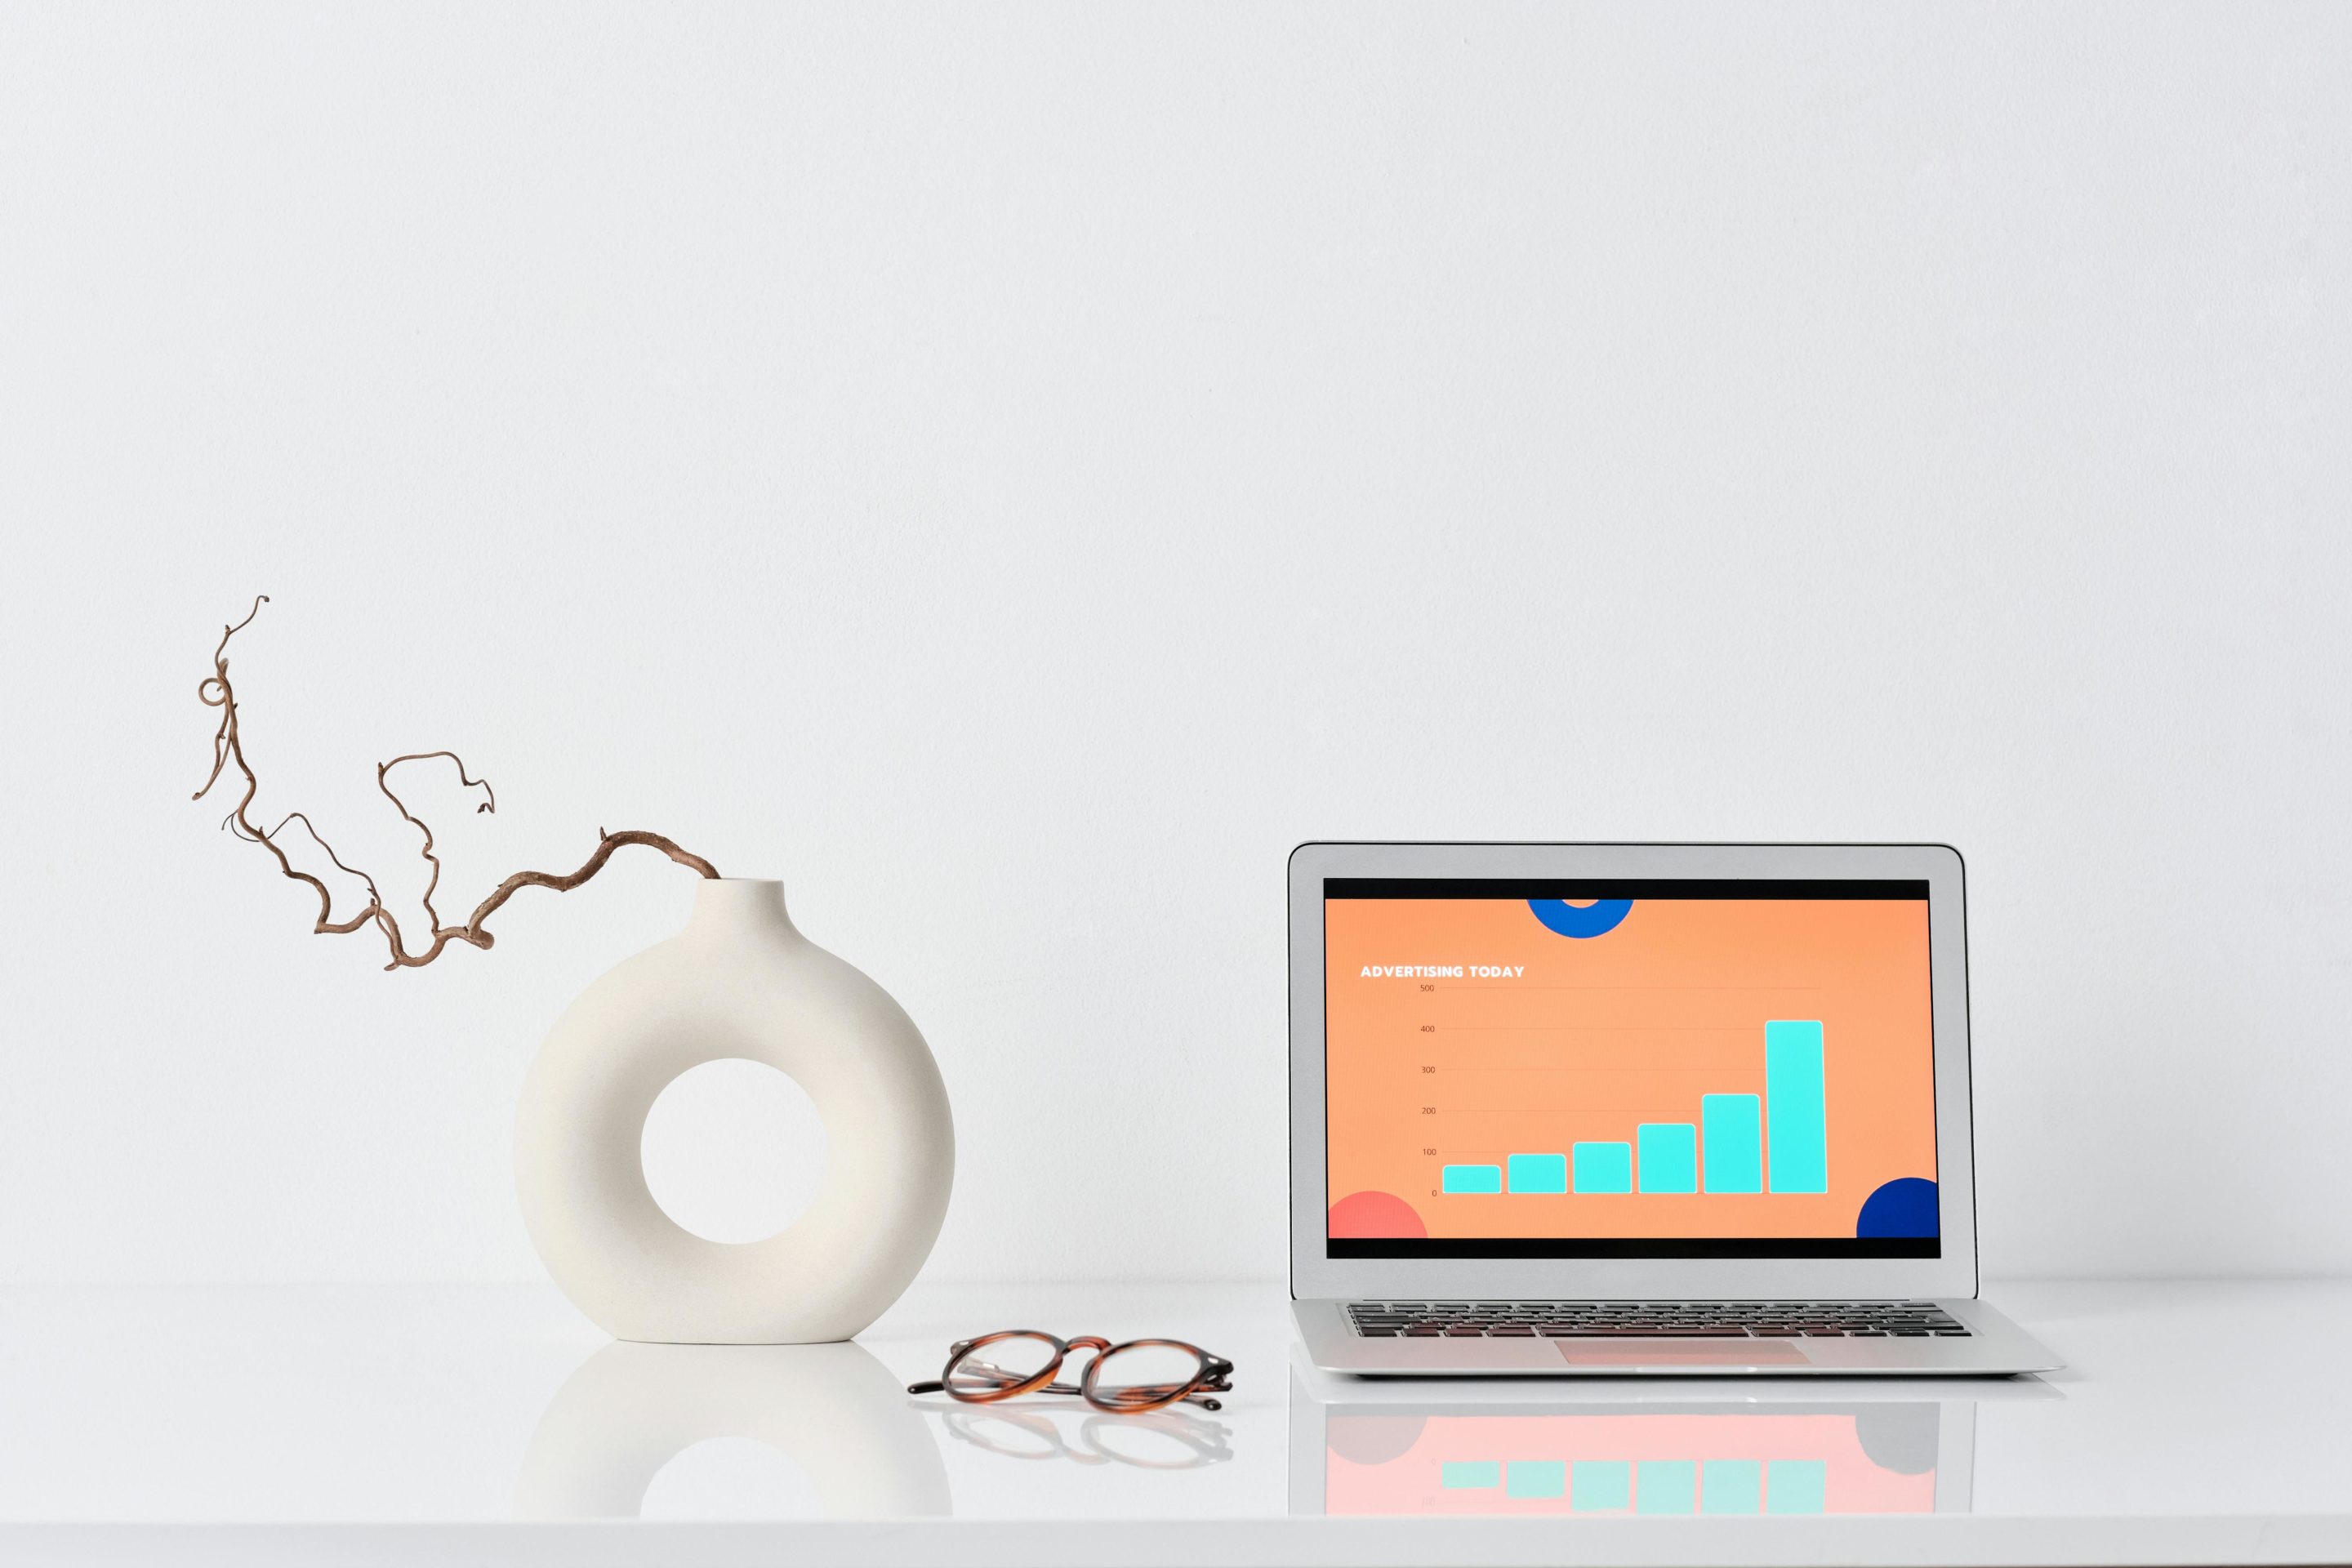 Laptop displaying a bar graph on a white desk beside a modern ceramic vase with dried twigs and a pair of glasses.